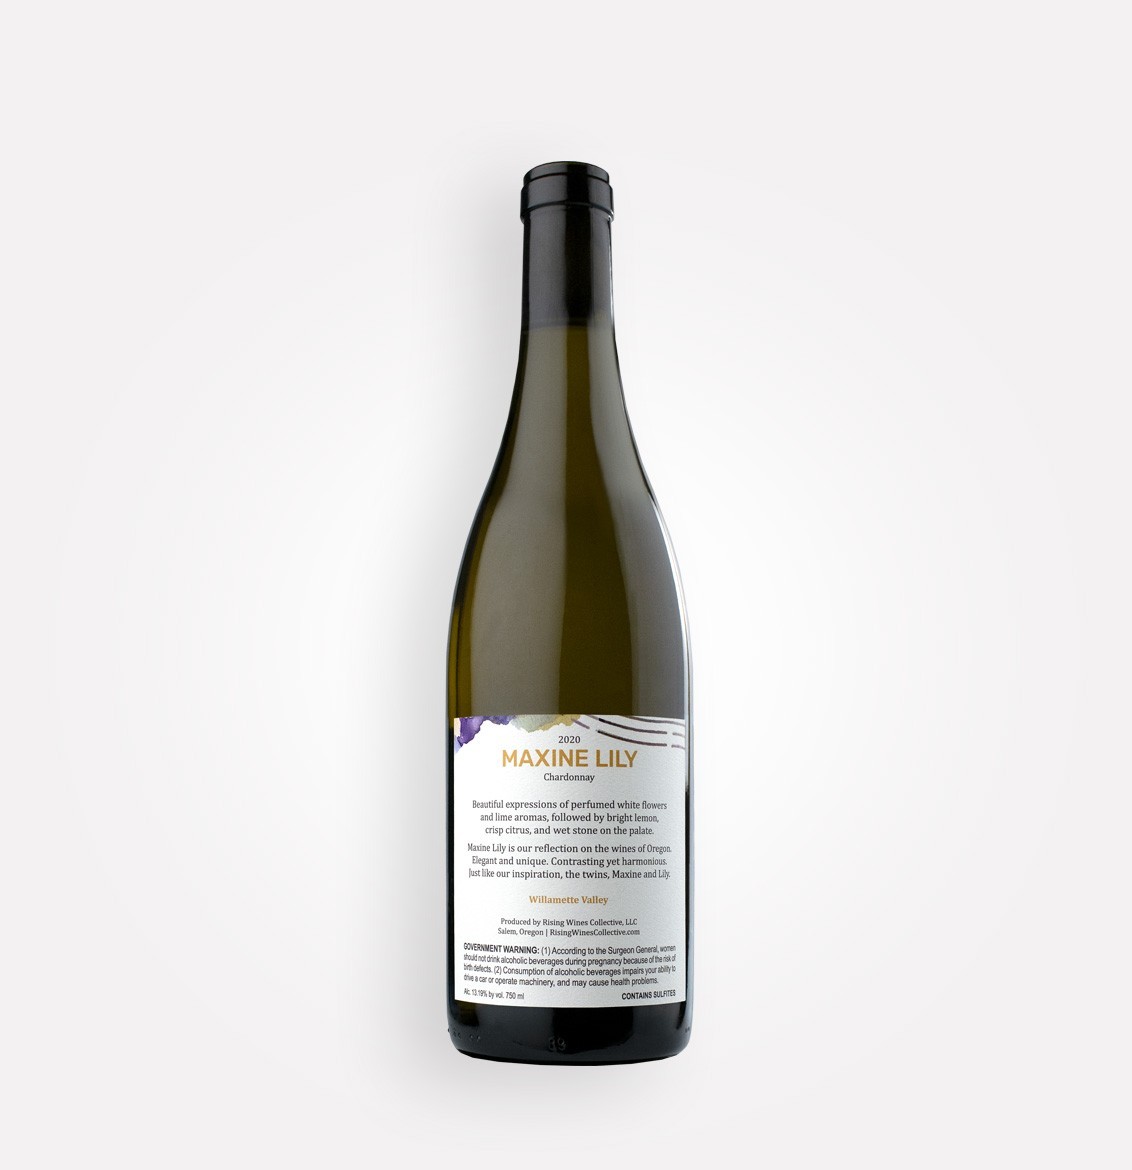 Back bottle view of Maxine Lily 2020 Chardonnay wine from Oregon's Willamette Valley